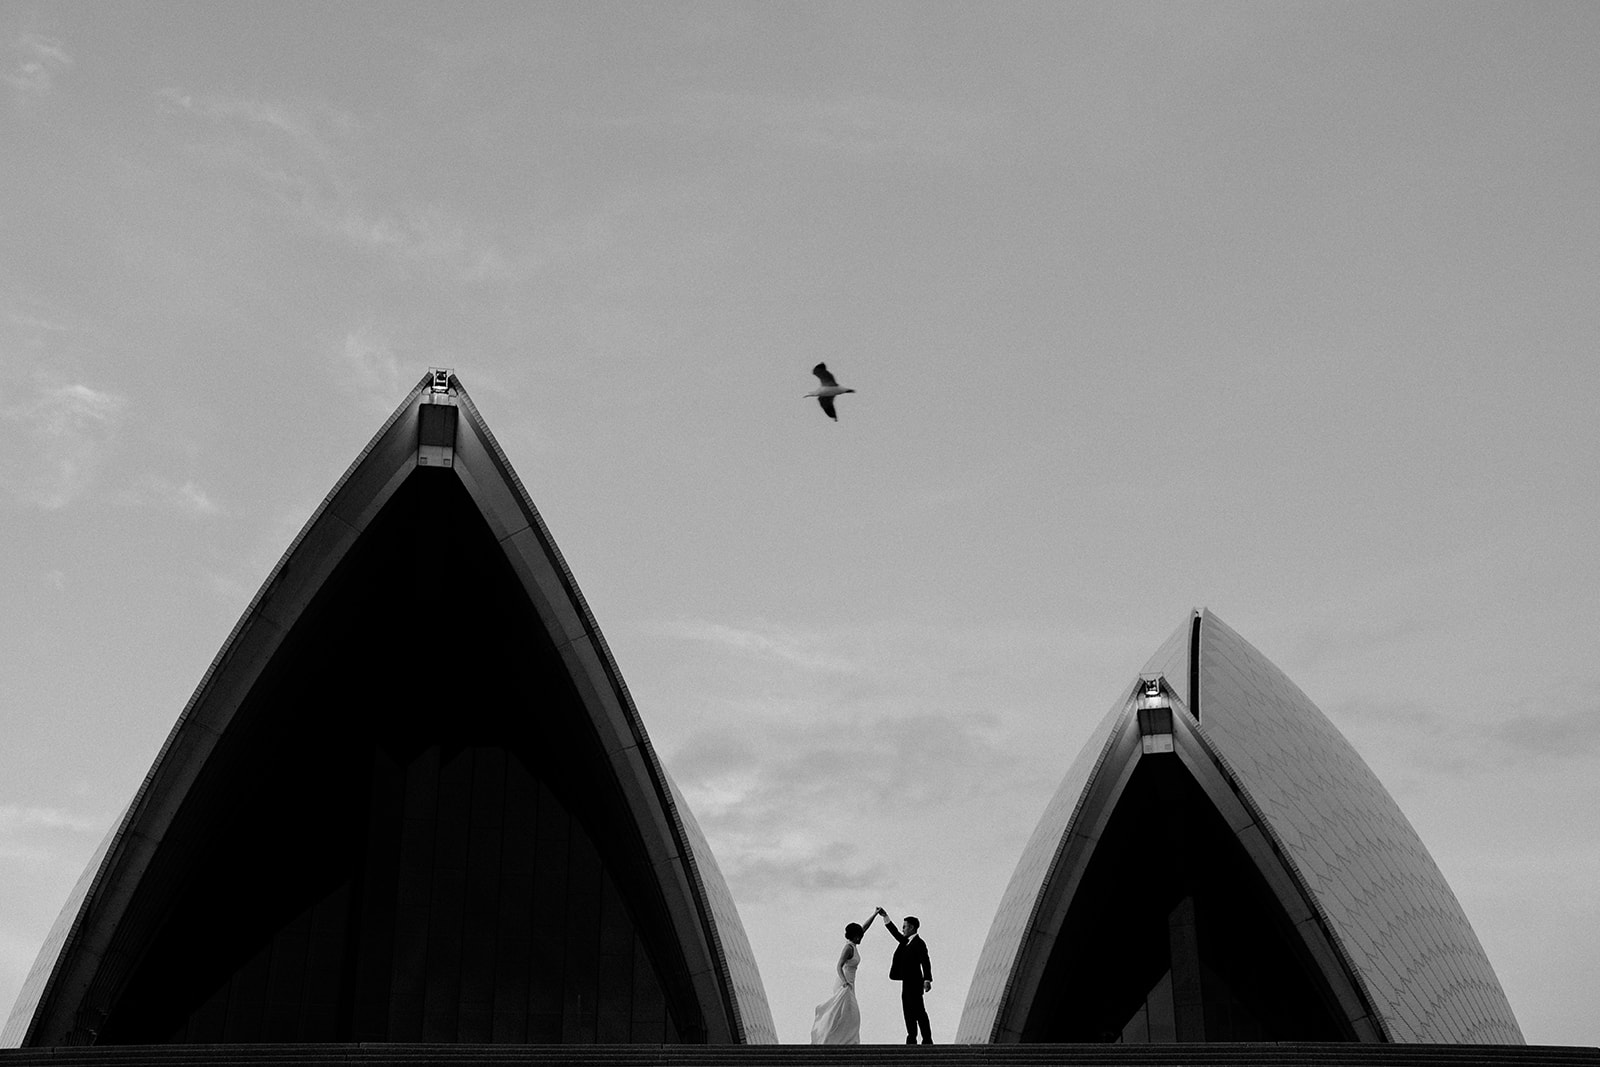 A photo of the bride and groom between the sails at the Opera house with a seagull flying above them